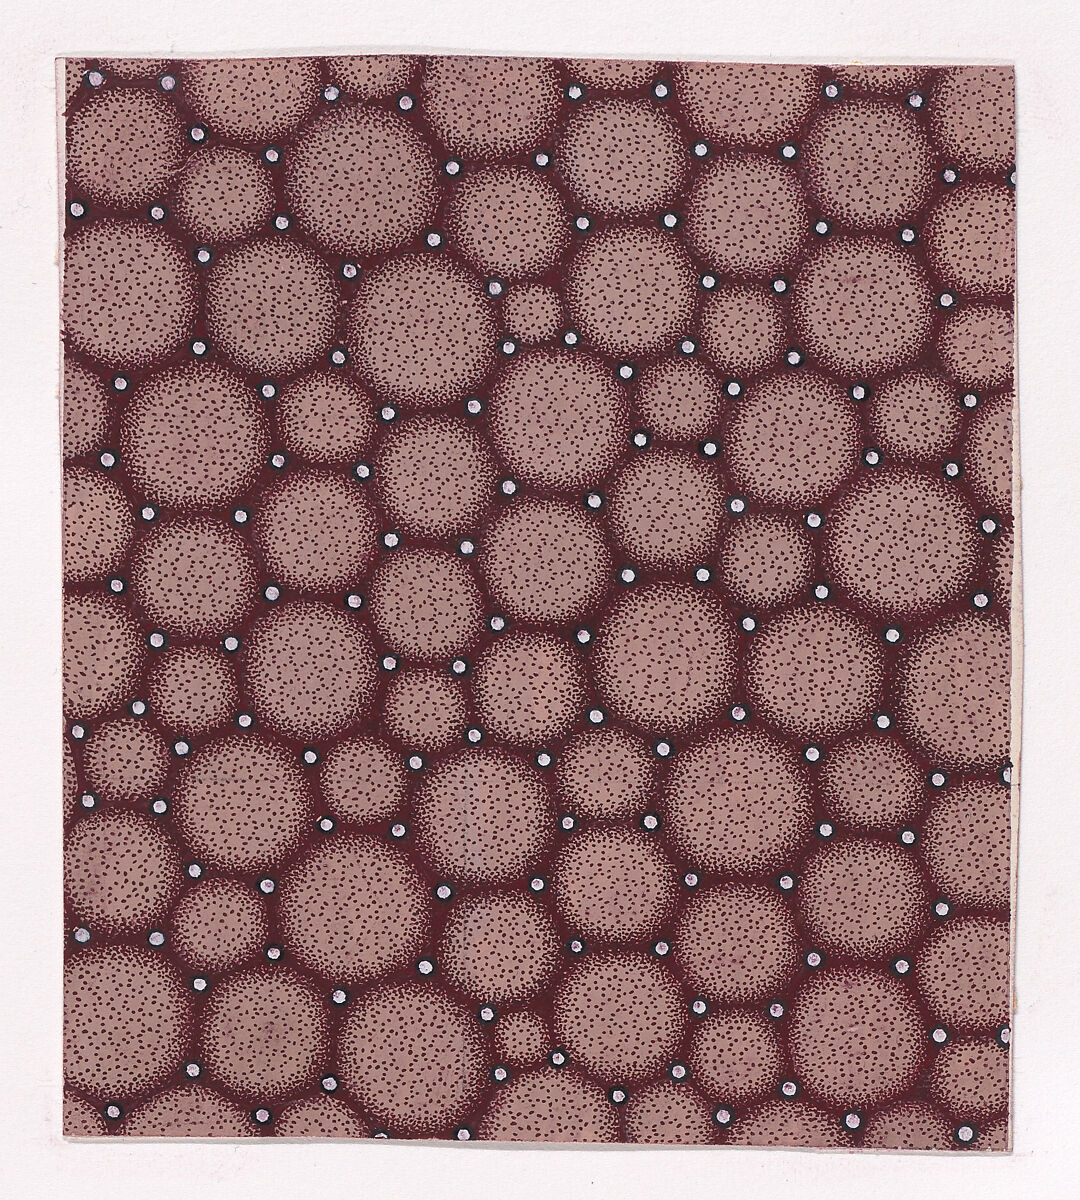 Textile Design with a Seamless Pattern of Circles and Pearls, Anonymous, Alsatian, 19th century, Gouache 